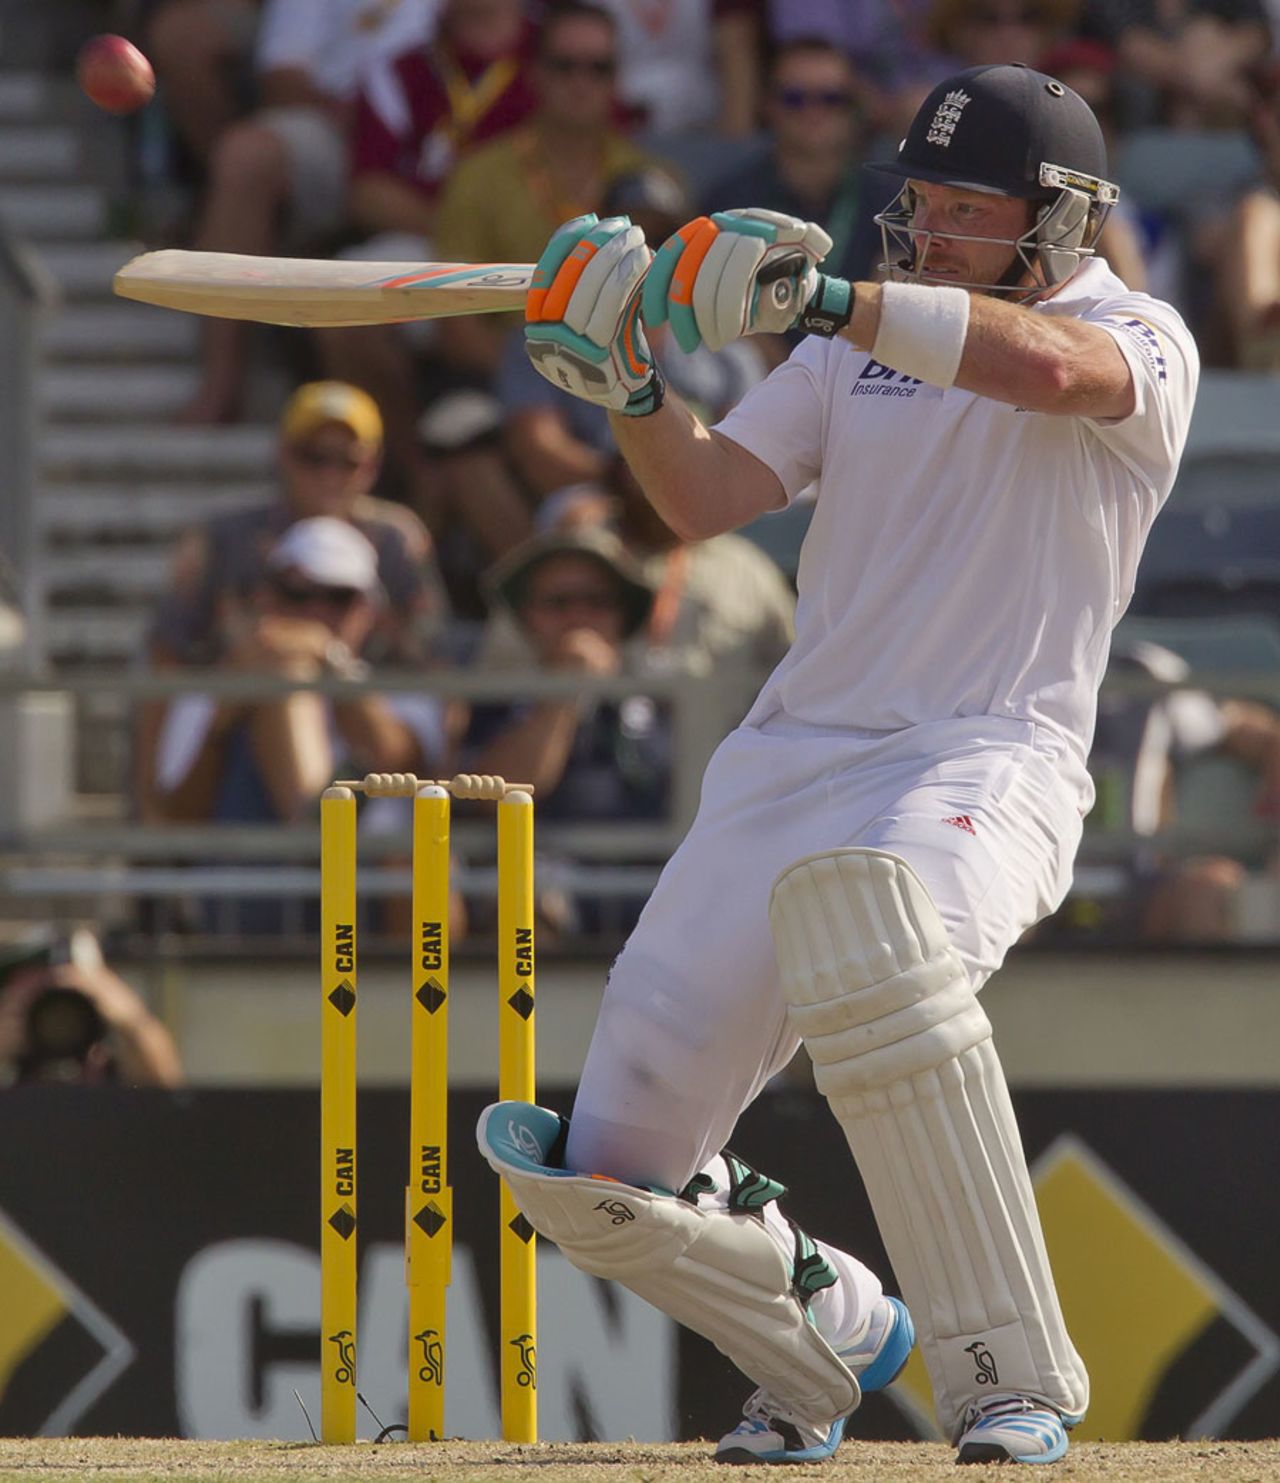 Ian Bell went on the offensive with England struggling, Australia v England, Test, Perth, 4th day, December 16, 2013